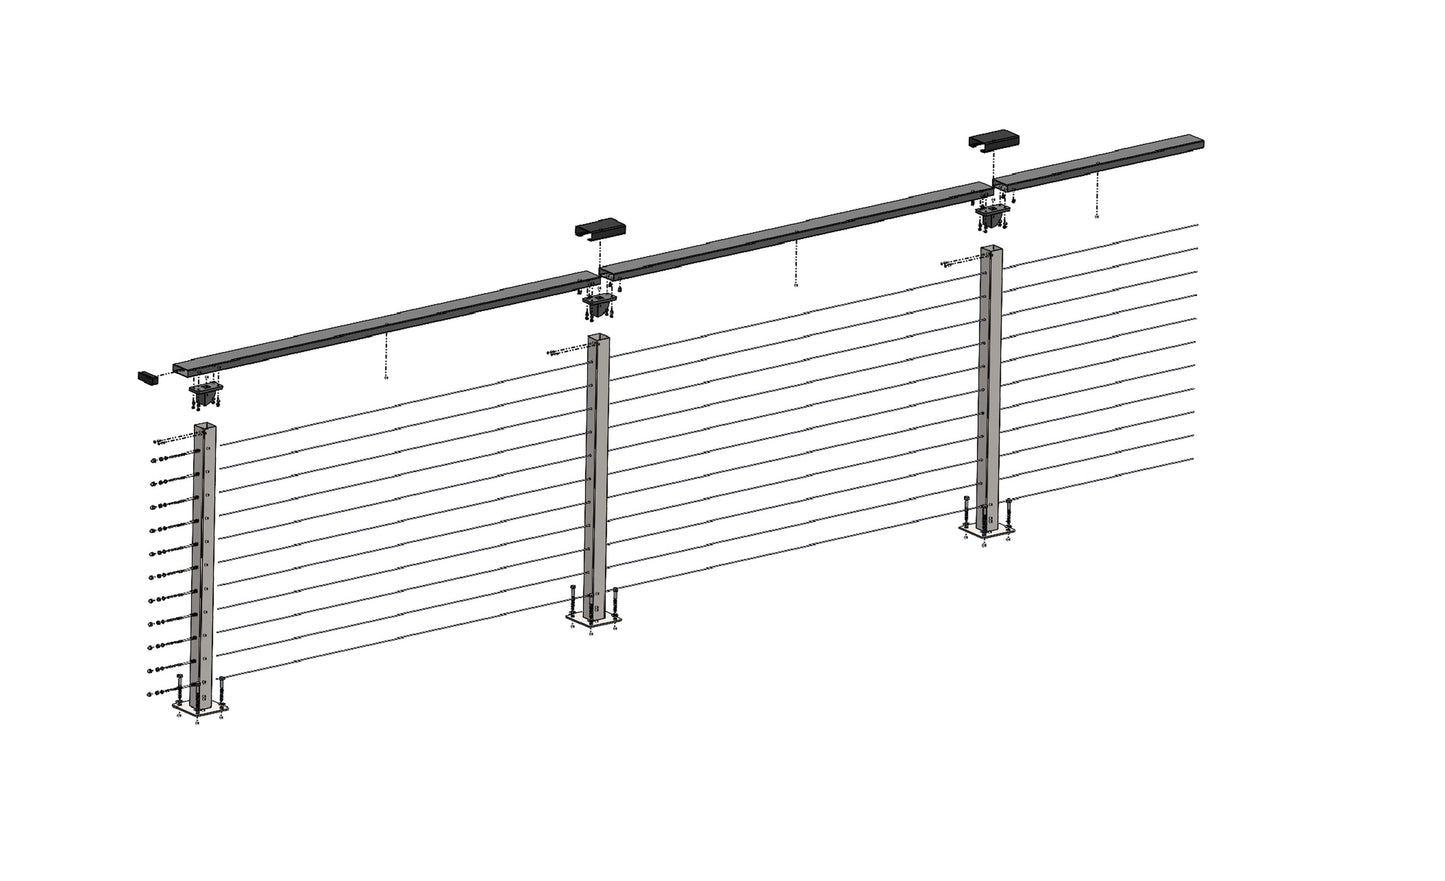 69 ft. x 42 in. Bronze Deck Cable Railing, Base Mount , Stainless